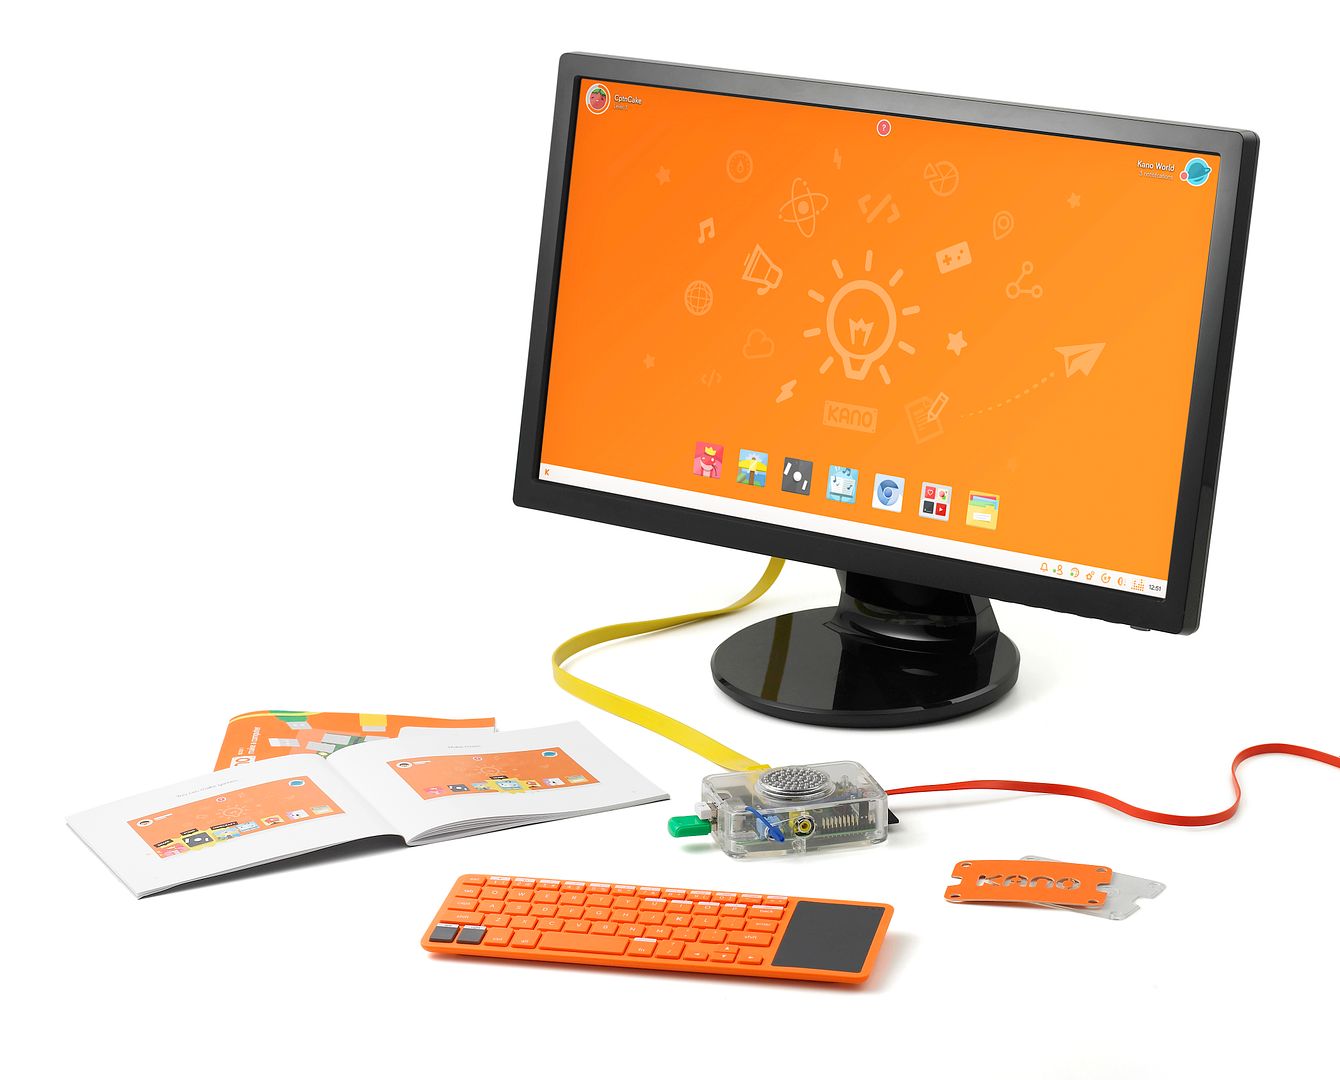 Kano Computer Kit for kids with monitor